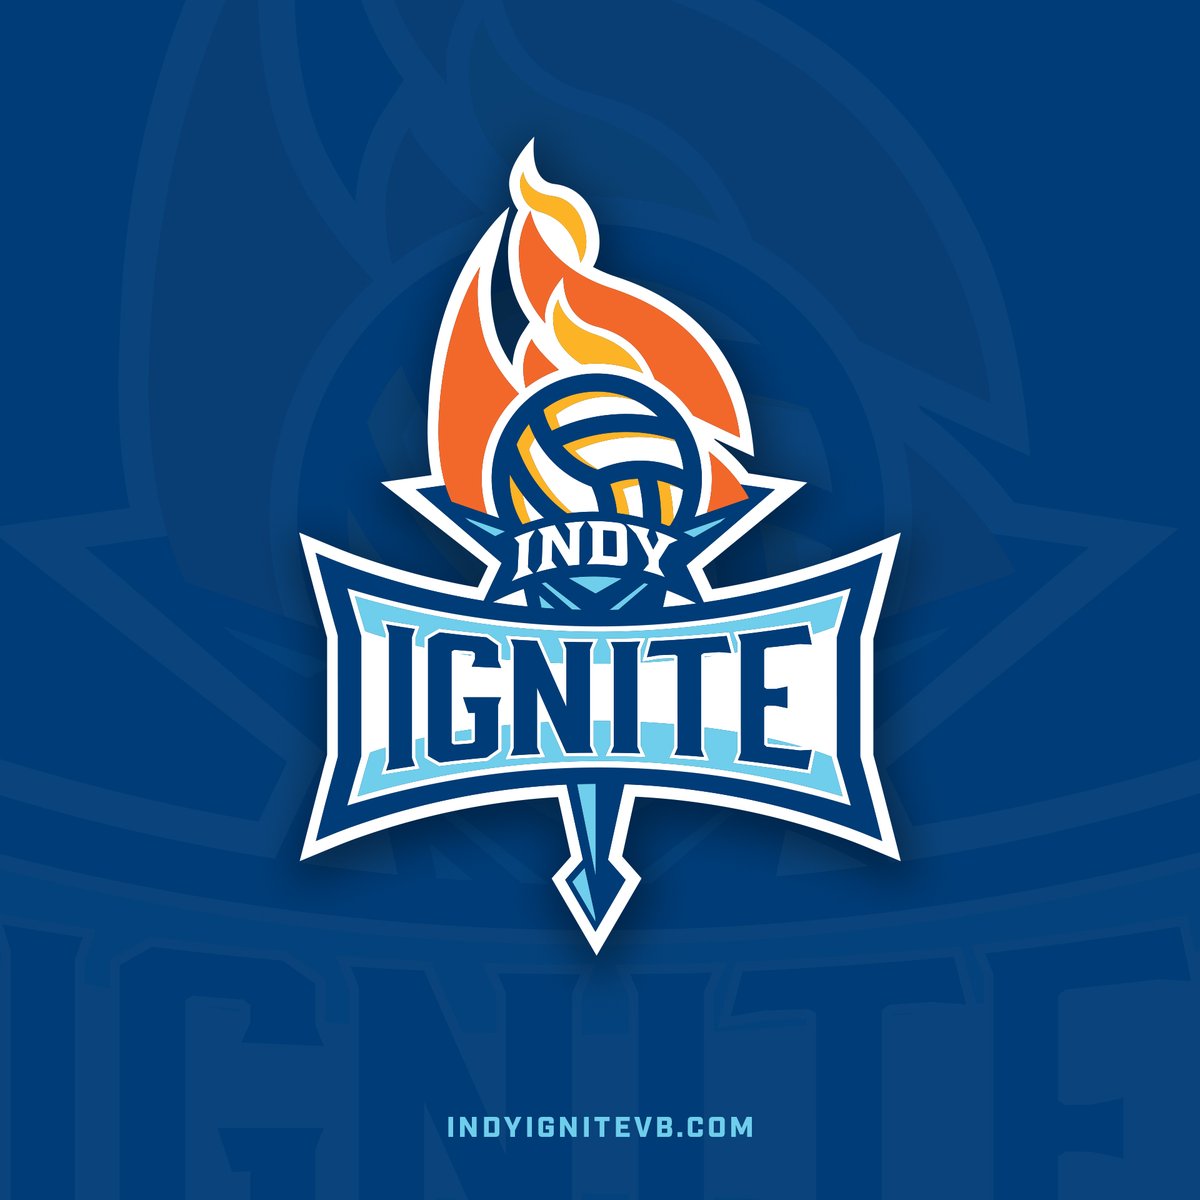 IGNITE THE FIRE! 🔥
@IndyIgniteVB comes to @RealProVB in 2025

#RallyWithUs #IgniteTheFire 
#RealProVolleyball